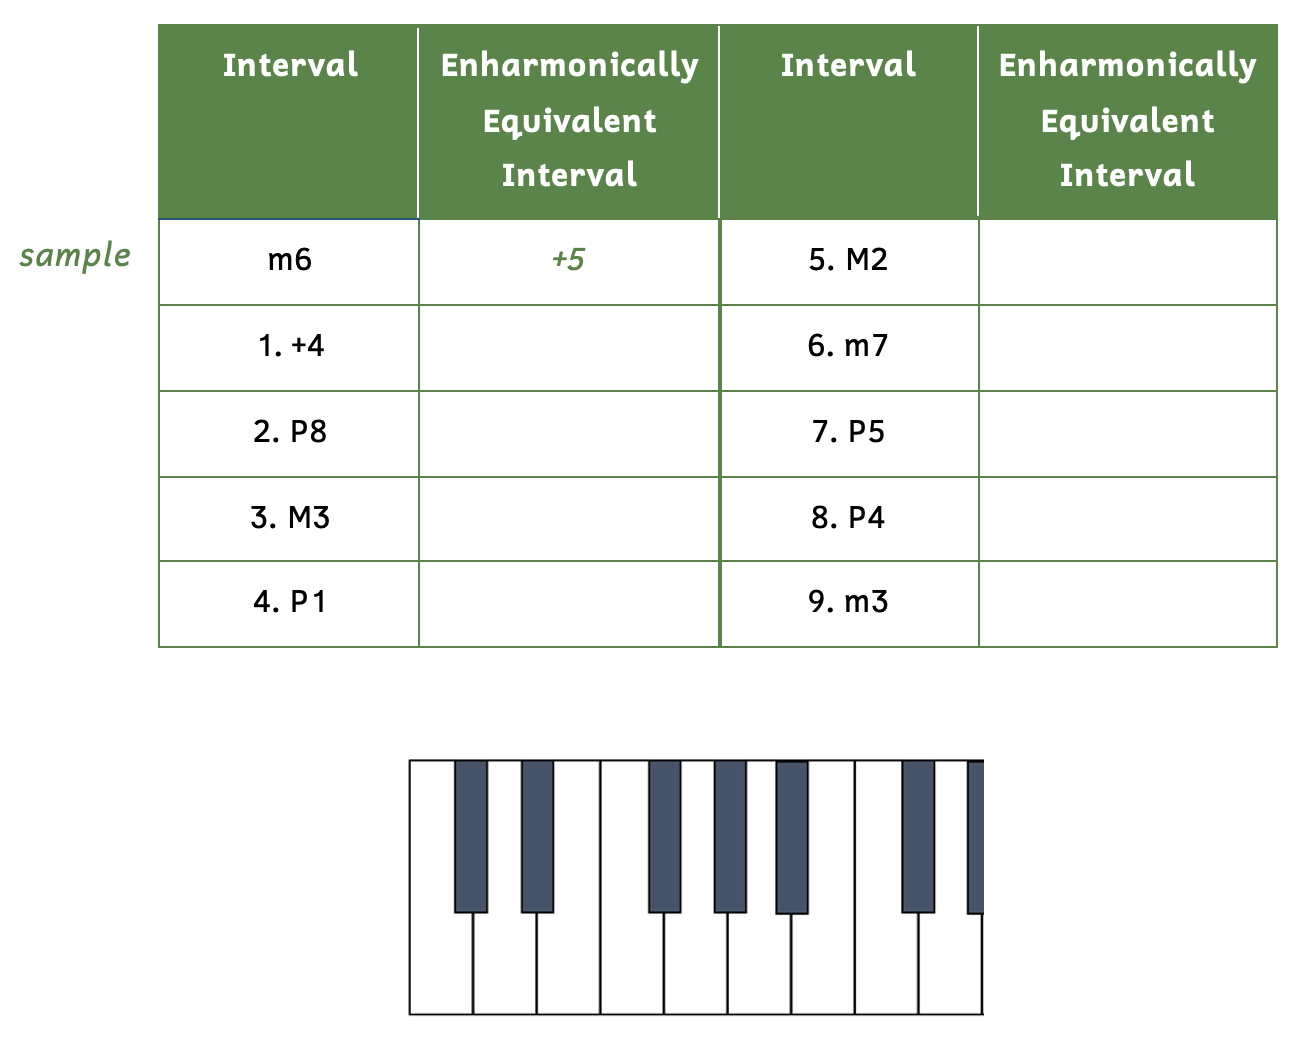 The sample shows the enharmonically equivalent interval to a minor sixth is an augmented fifth. Number 1, augmented fourth. Number 2, perfect octave. Number 3, major third. Number 4, perfect unison. Number 5, major second. Number 6, minor seventh. Number 7, perfect fifth. Number 8, perfect fourth. Number 9, minor third.